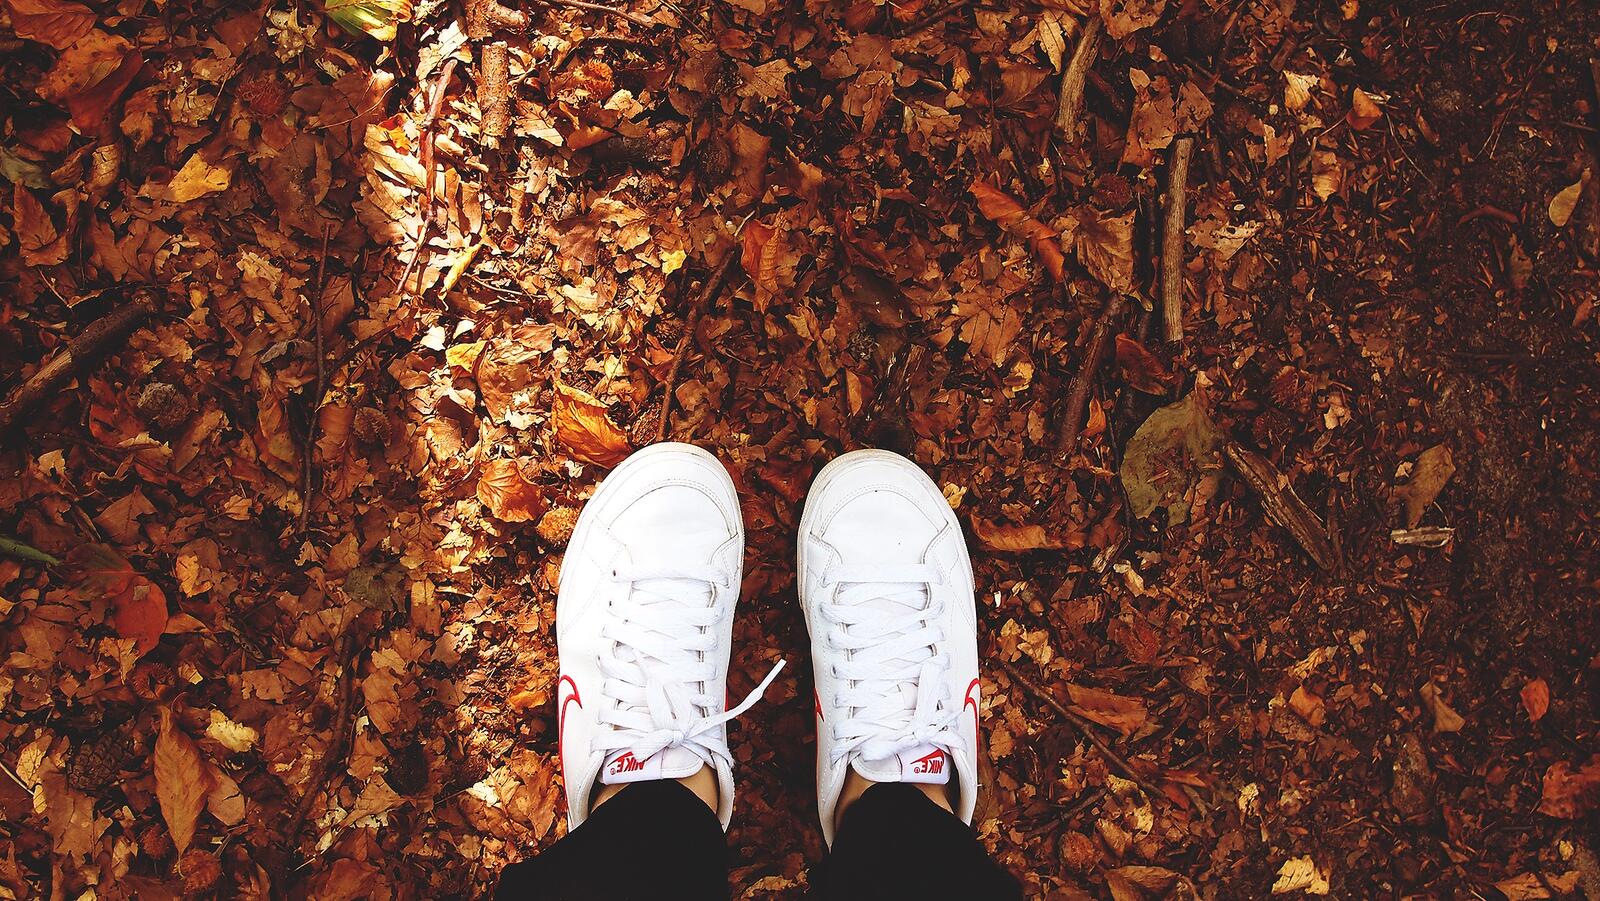 Free photo Wearing white sneakers, walking on the autumn ground as the leaves fall.